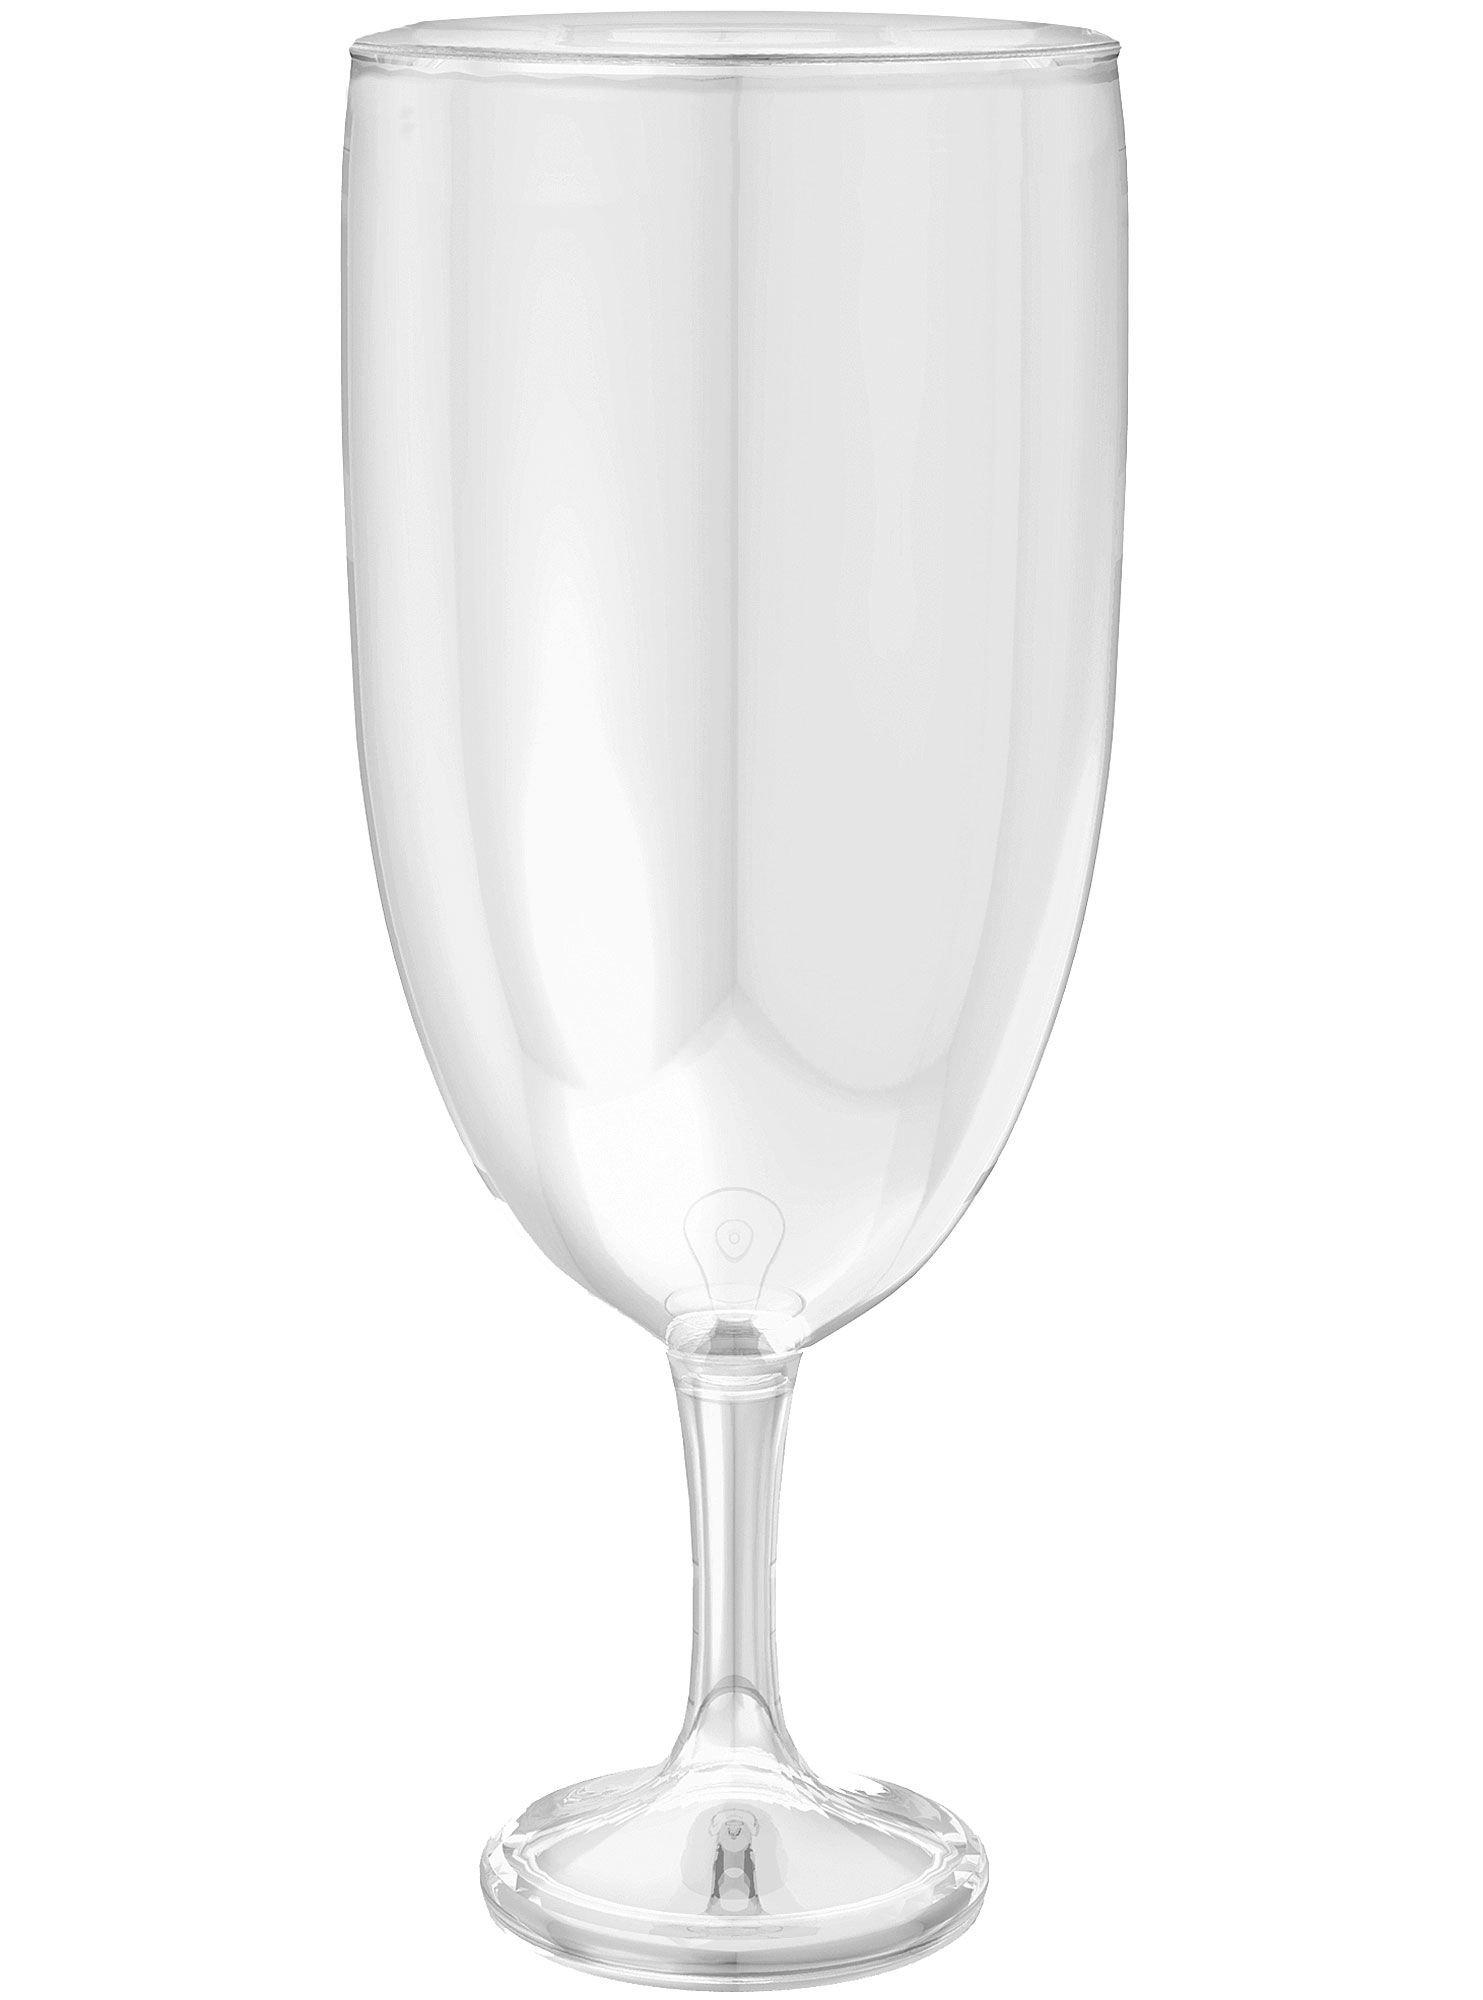 Giant Clear Plastic Wine Glass